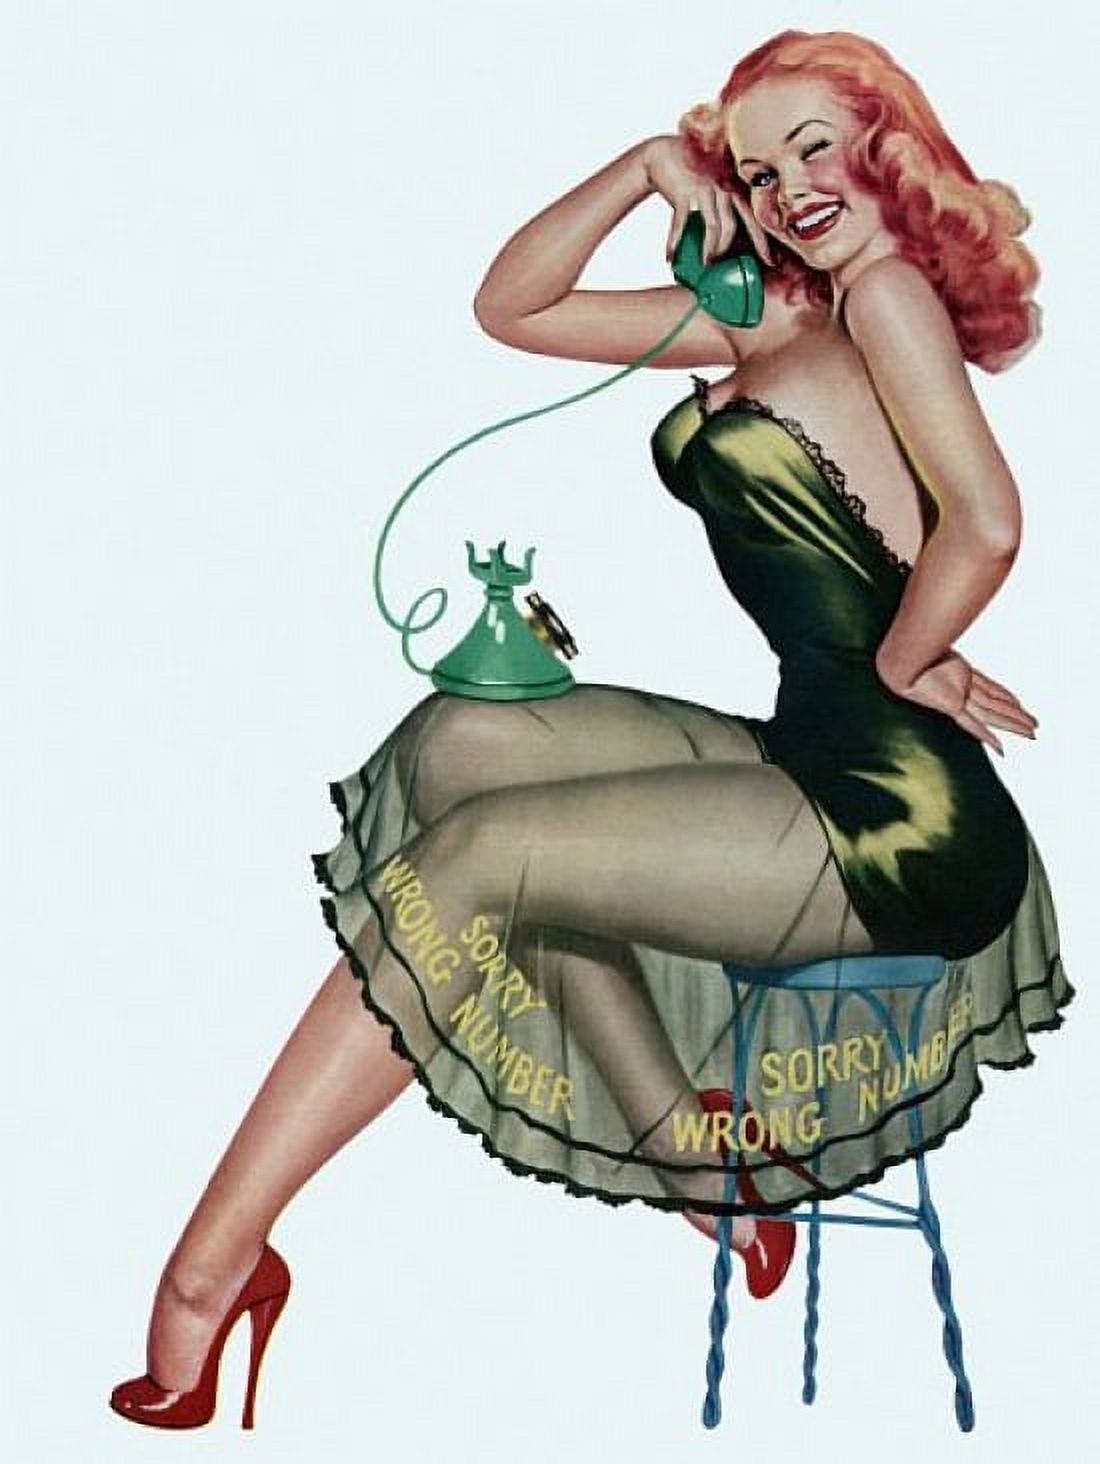 Pin Up Vintage Pinup Girl On Poster Print (18 x 24) - image 1 of 1